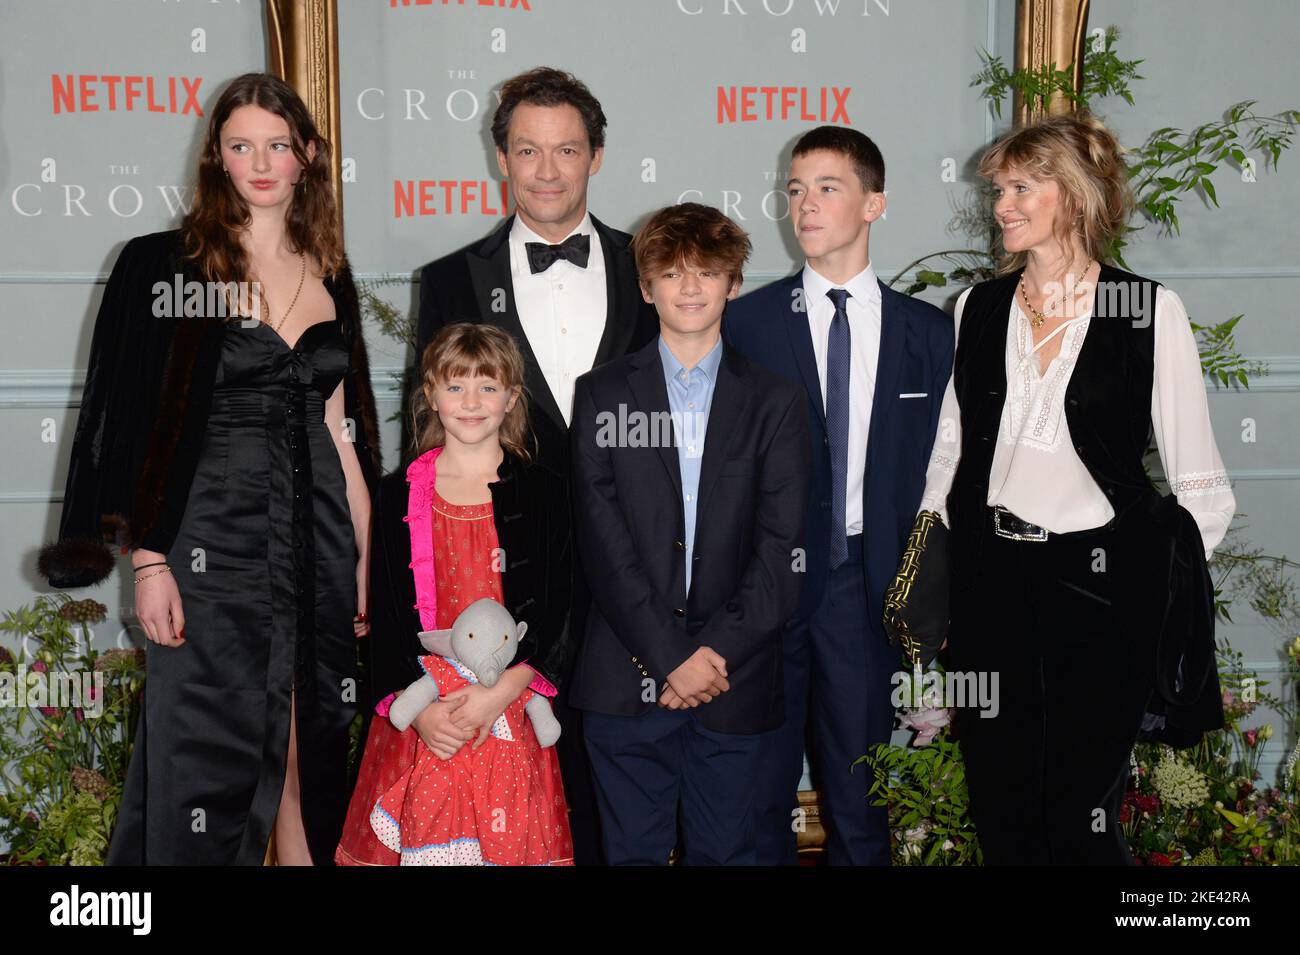 Photo Must Be Credited ©Alpha Press 078237 08/10/2022 Dominic West and Catherine FitzGerald with their children Dora Senan Francis and Christabel  The Crown Season 5 Five Premiere In London Stock Photo